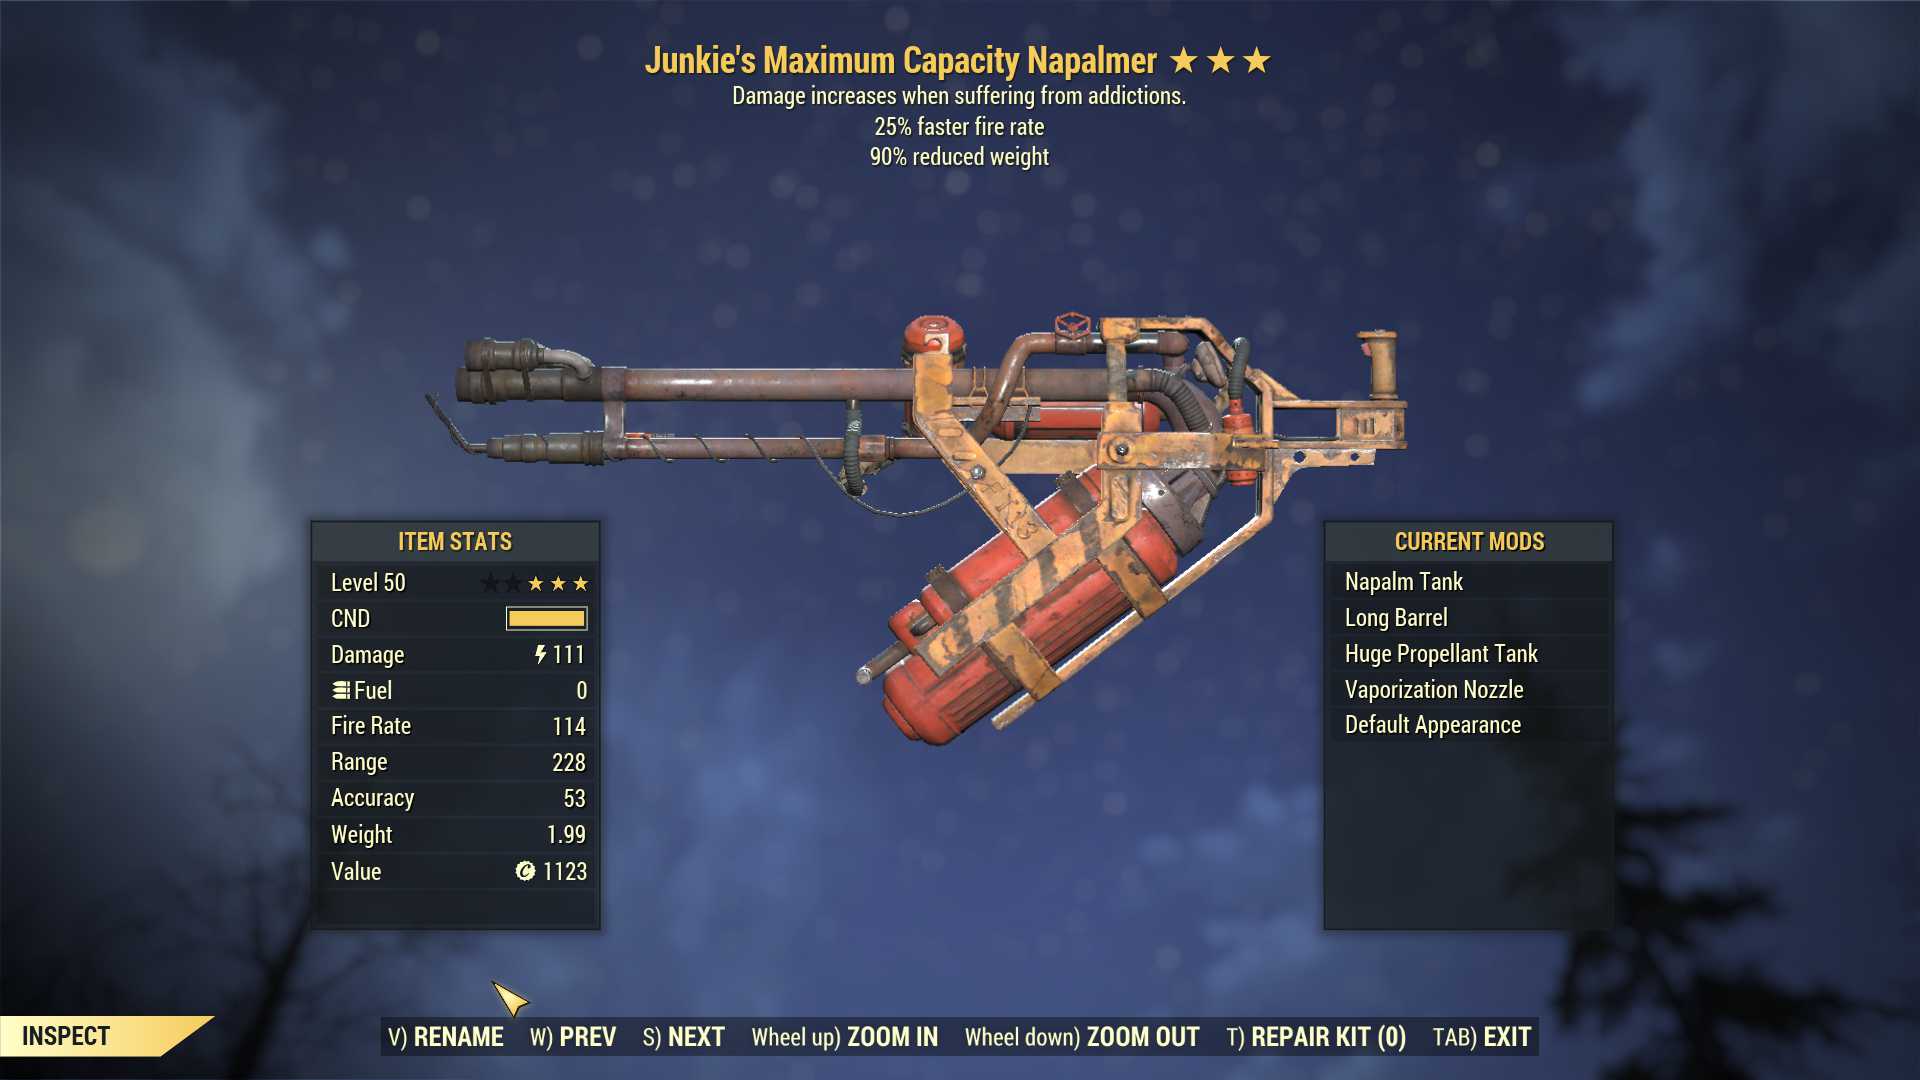 Junkie's Flamer (25% faster fire rate, 90% reduced weight)